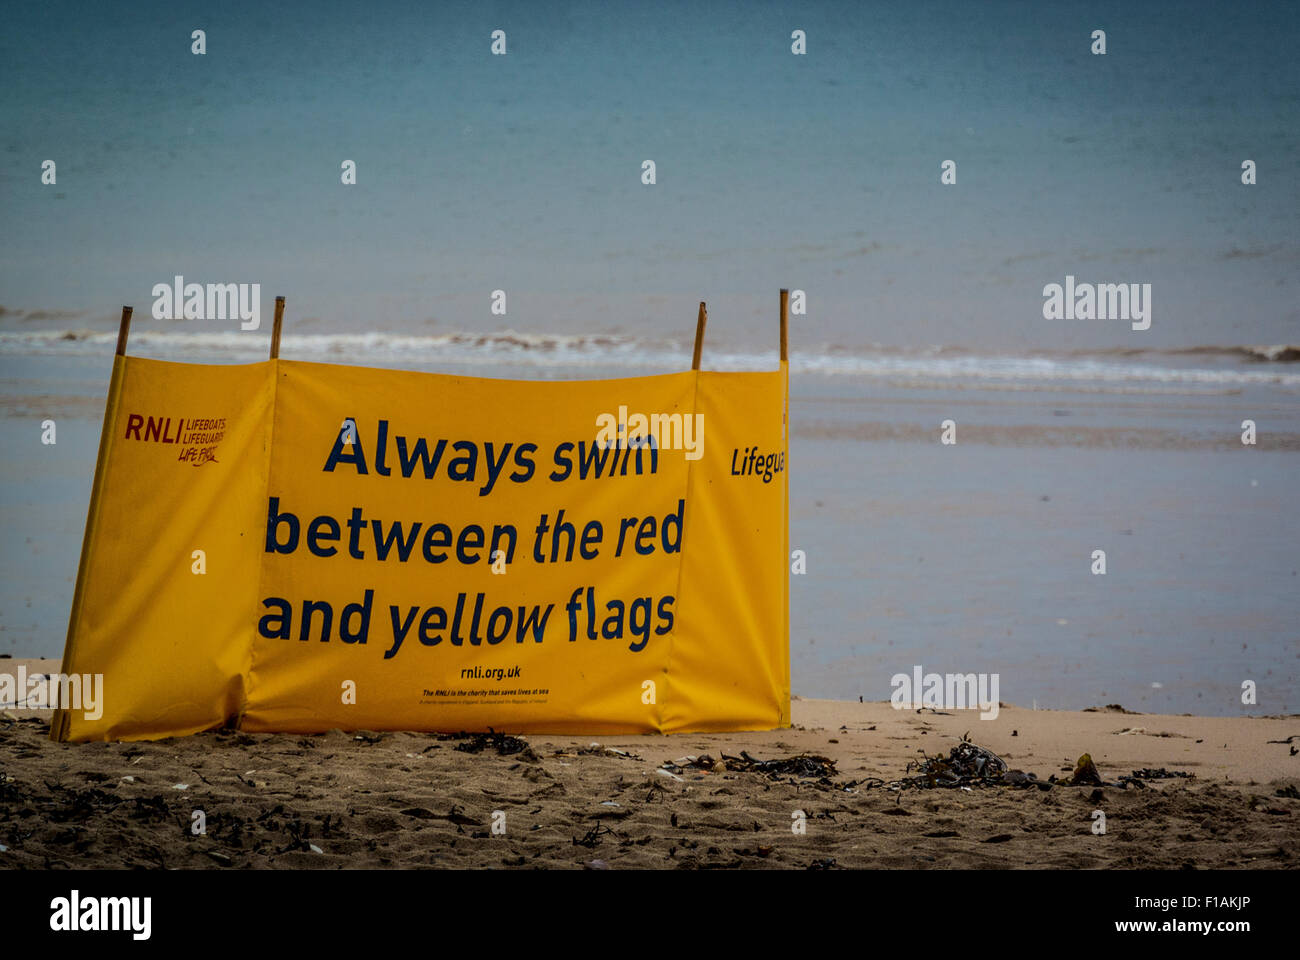 Always swim between the red and yellow flags sign on beach Stock Photo